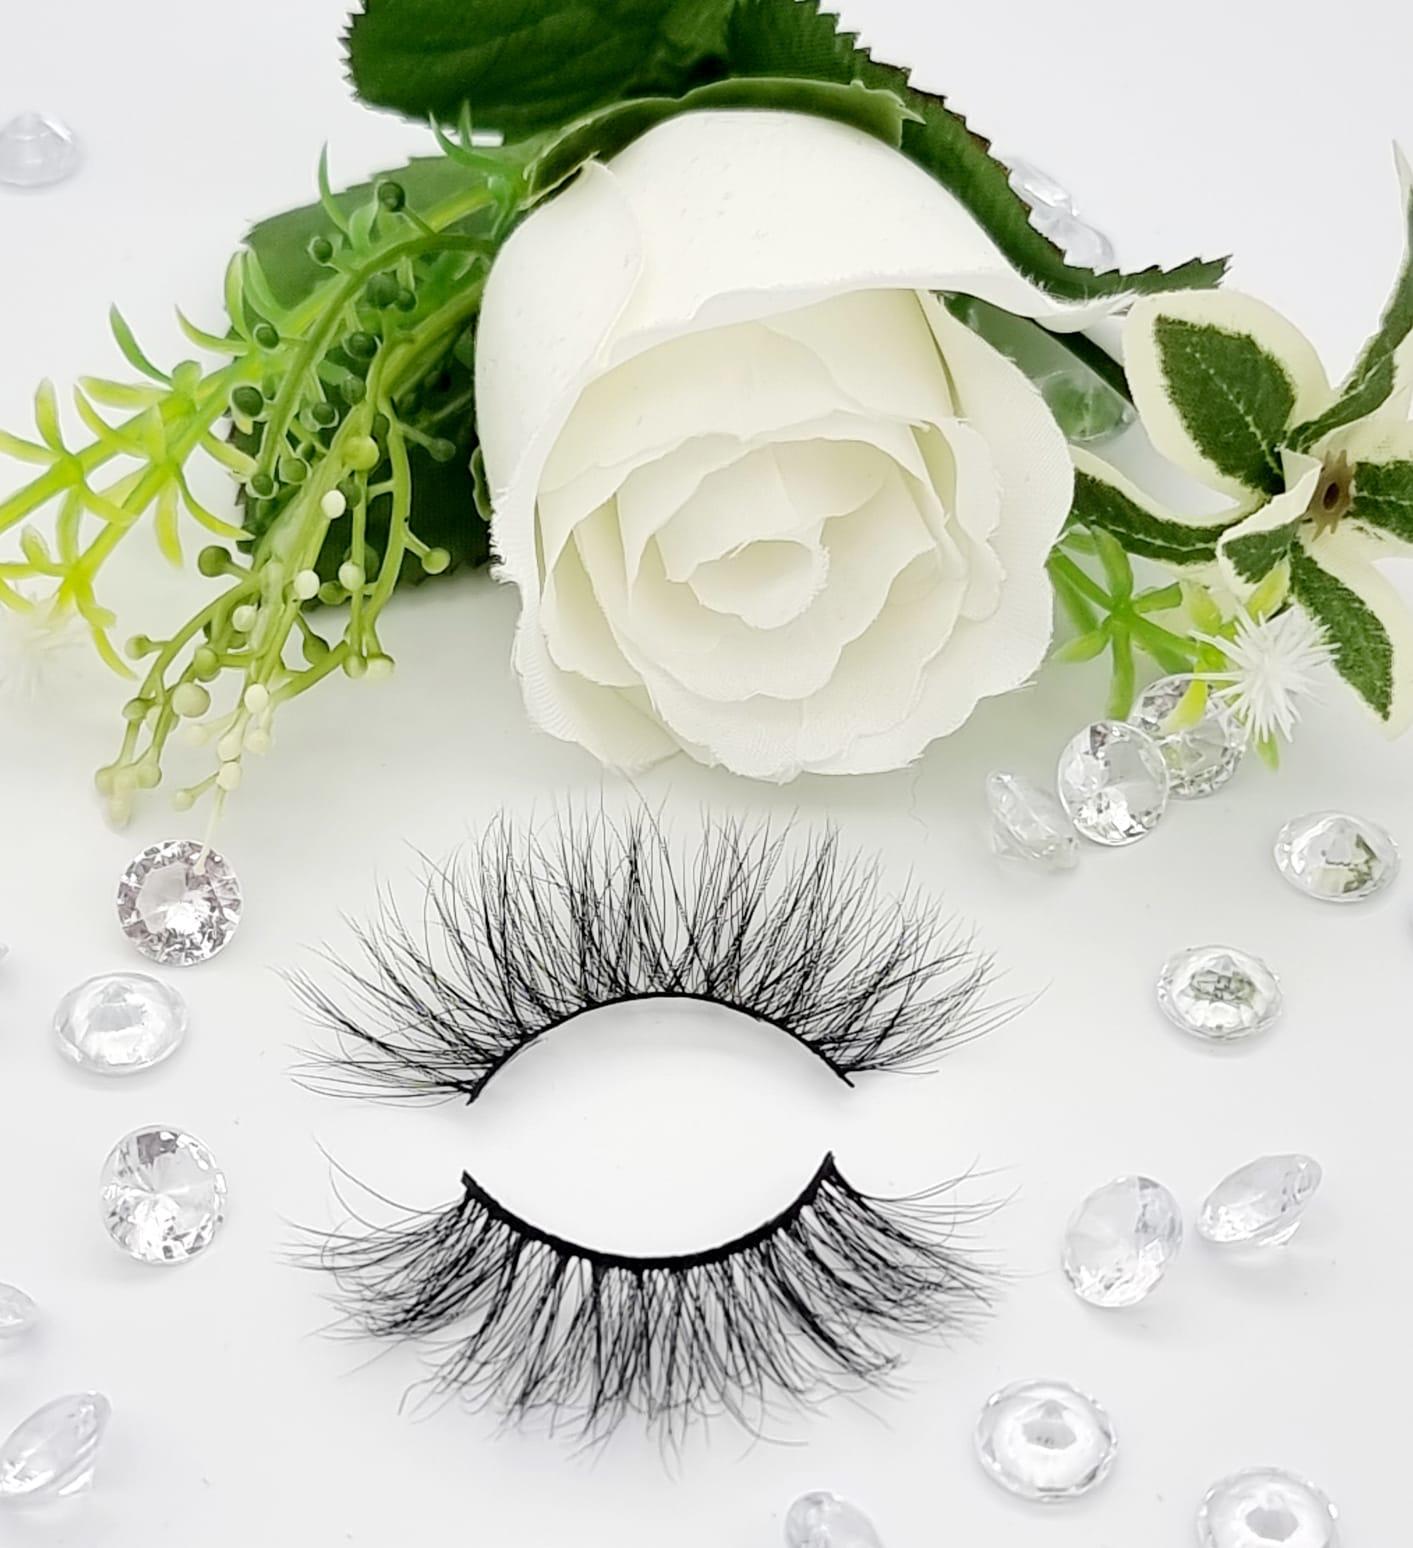 Mink Lashes Natural yet stylish, this round mink lash adds the most subtle length and volume to your natural lashes making it perfect for any eye shape. This lightweight lash is made of the finest grade mink fur applied to extremely comfortable soft black band making these comfortable for all day wear